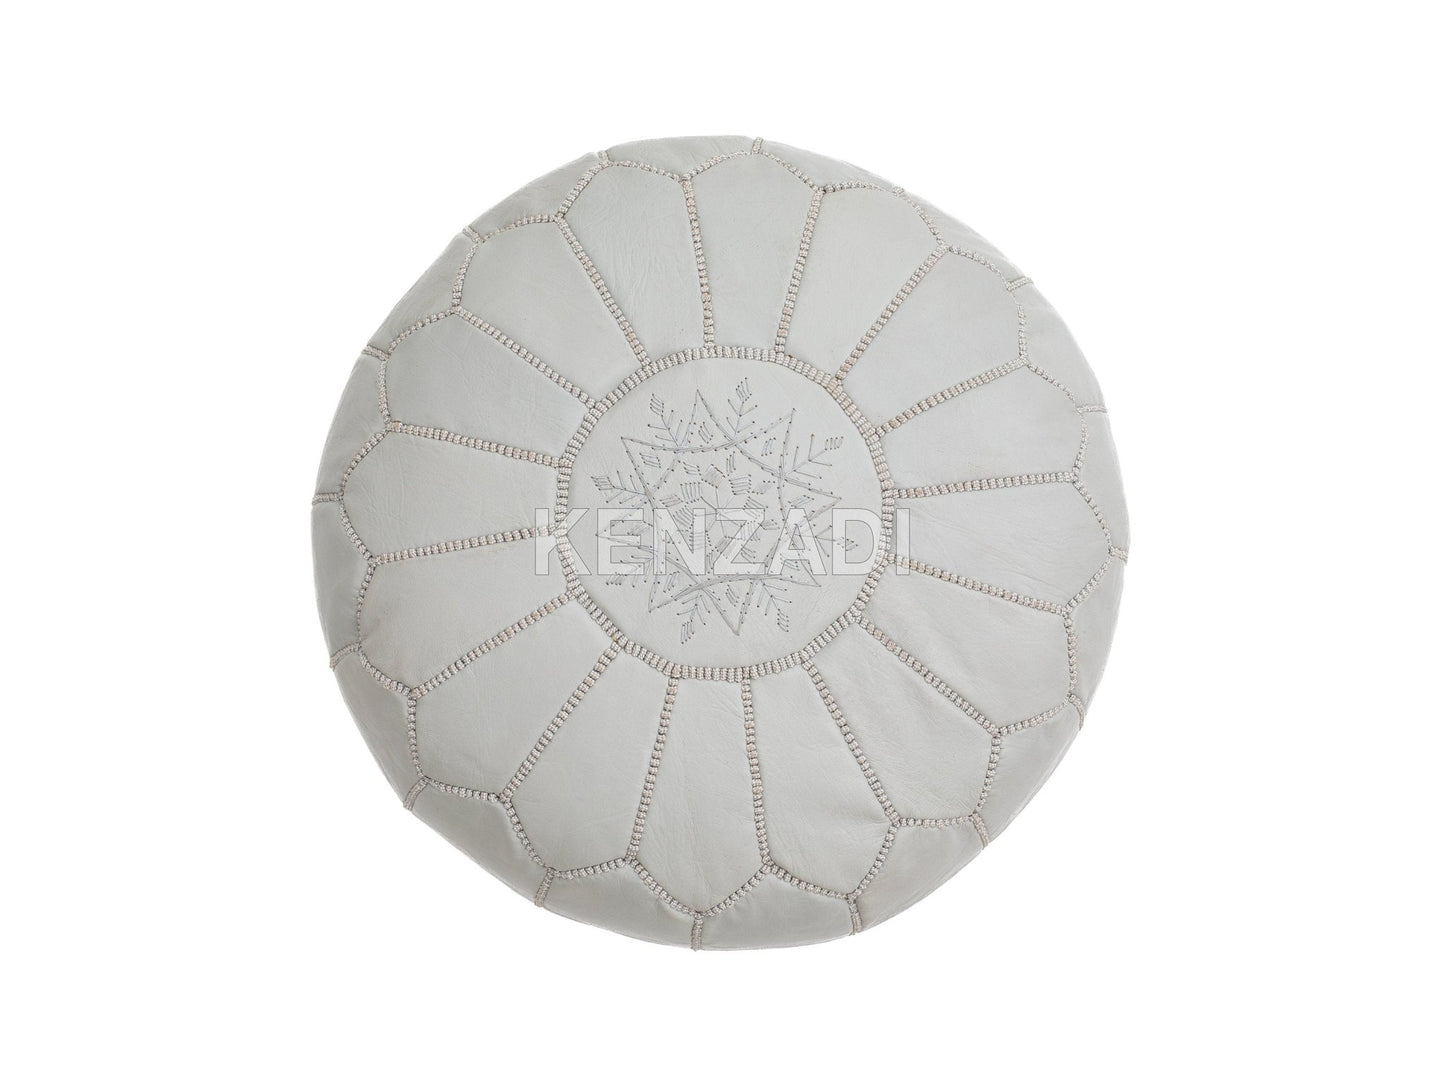 Authentic Moroccan leather pouf with grey embroidery, perfect for adding a bohemian touch to your décor.